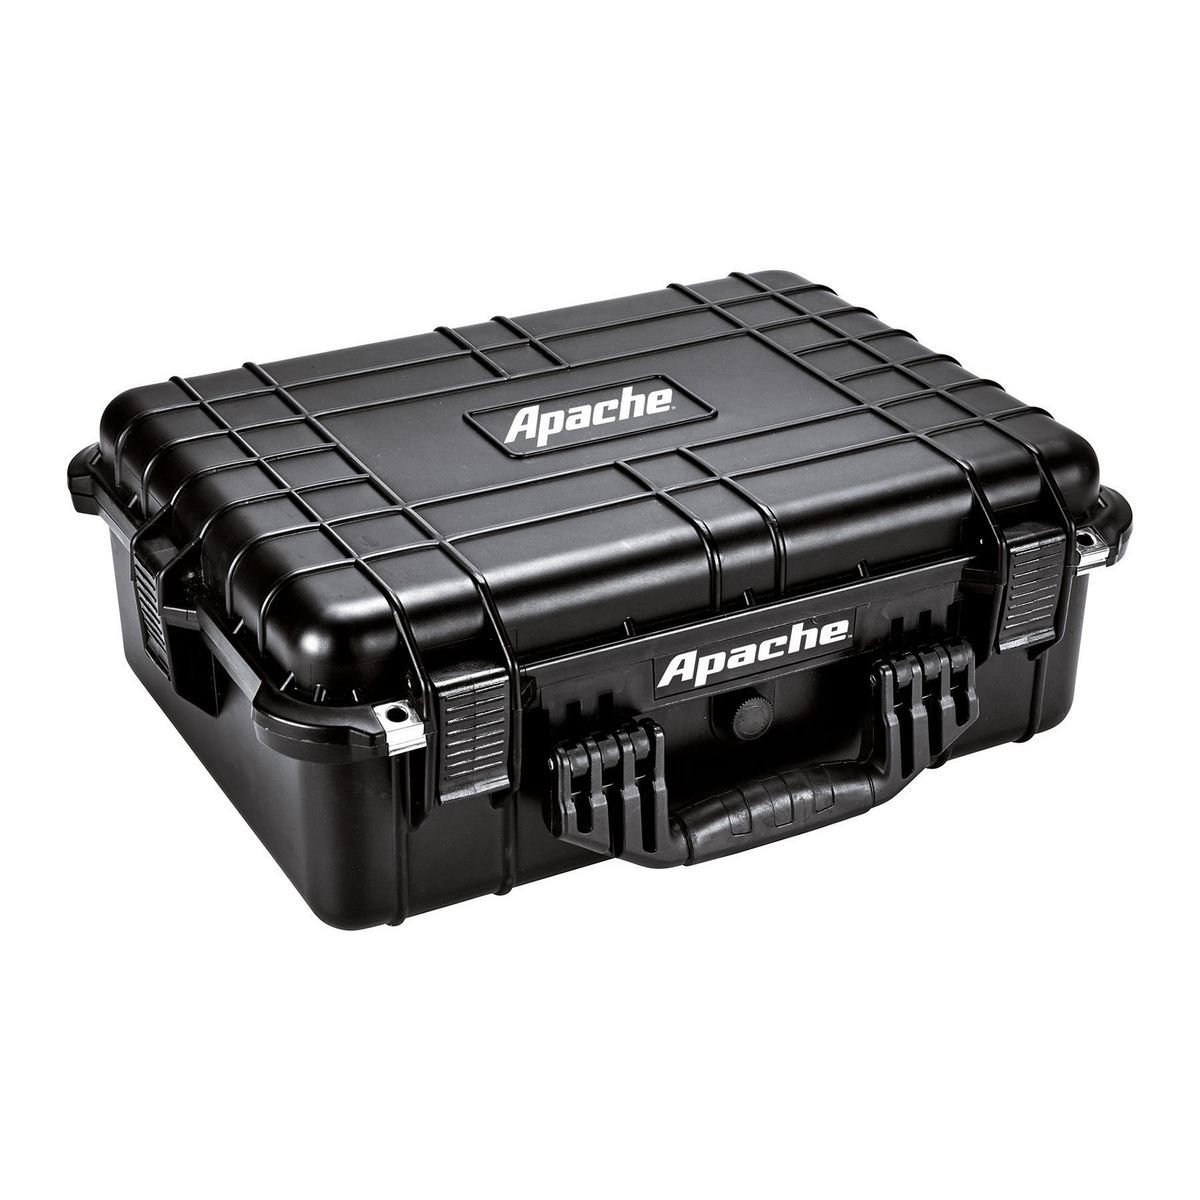 Black Apache 4800 Weatherproof Protective Case, X-Large, Watertight, dust-tight, impact resistant protective case